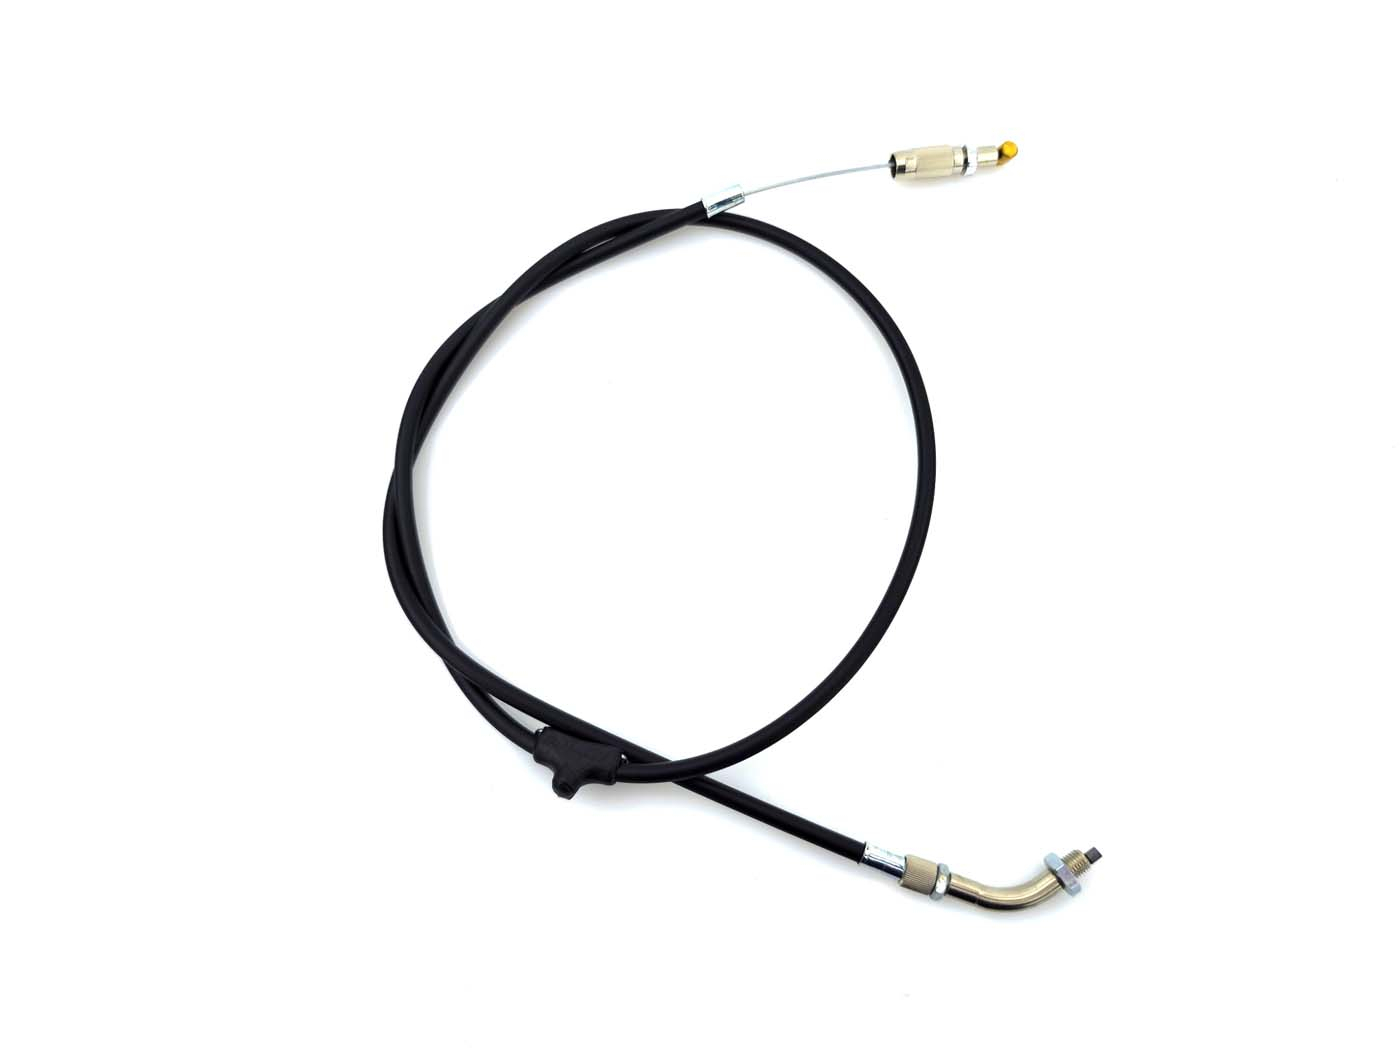 Throttle Cable For Bing Carburetor For Zündapp ZD 10, Zündapp ZD 20, Zündapp ZR 10/20